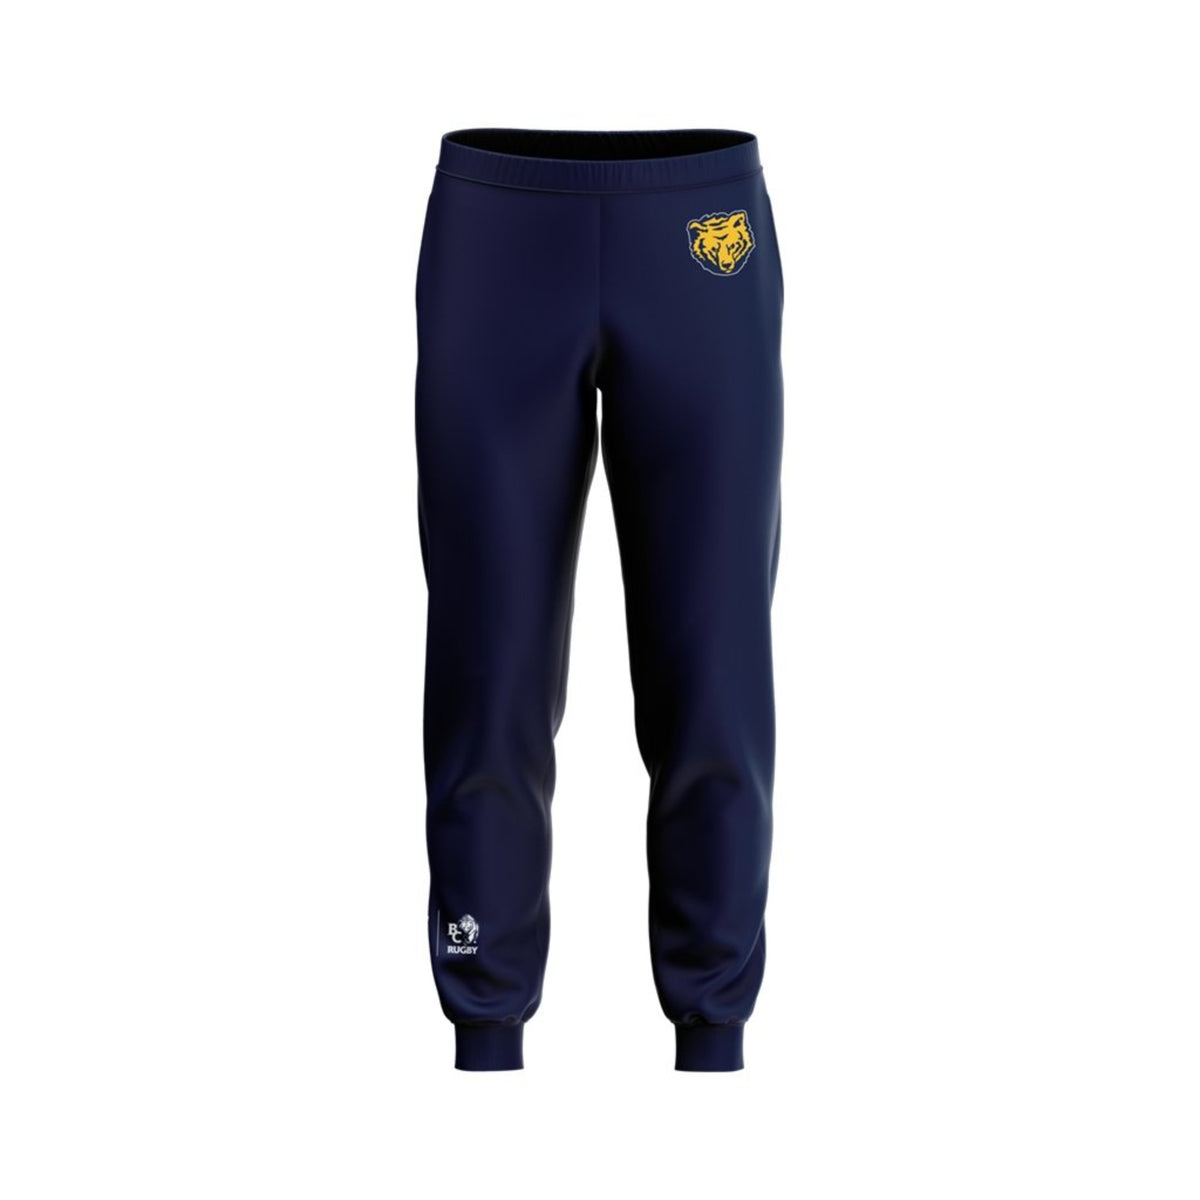 BC Rugby 2022 Bears Sweat Pants - www.therugbyshop.com www.therugbyshop.com MEN&#39;S / DARK NAVY / S XIX Brands PANTS BC Rugby 2022 Bears Sweat Pants